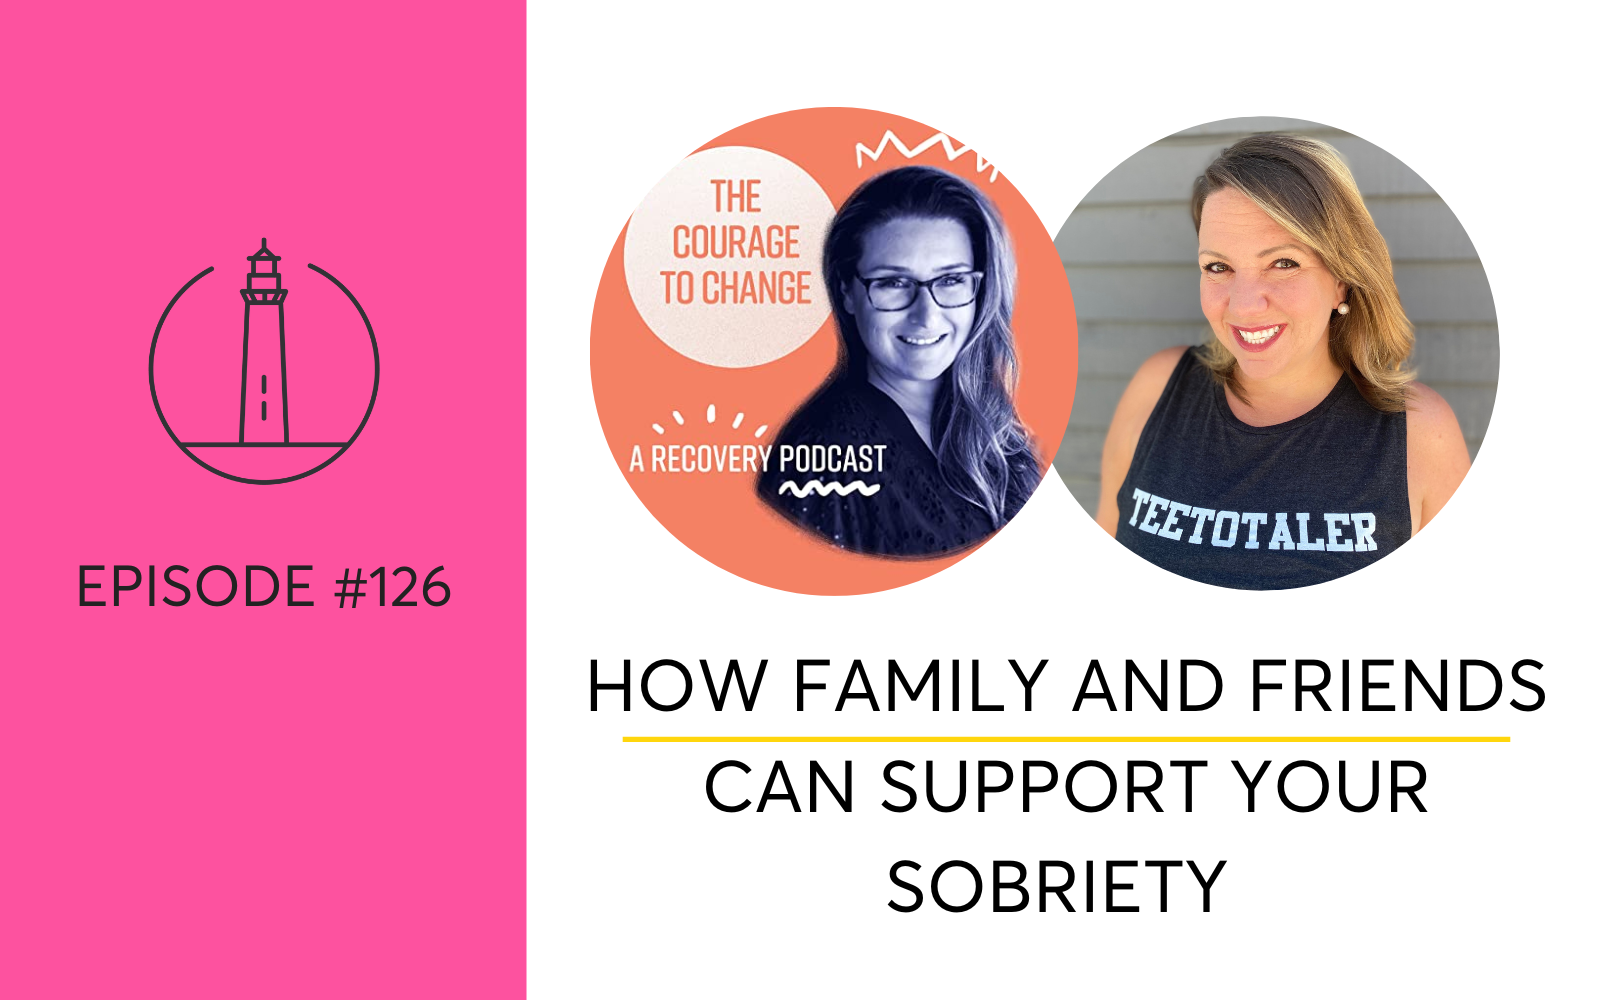 How Family And Friends Can Support Your Sobriety